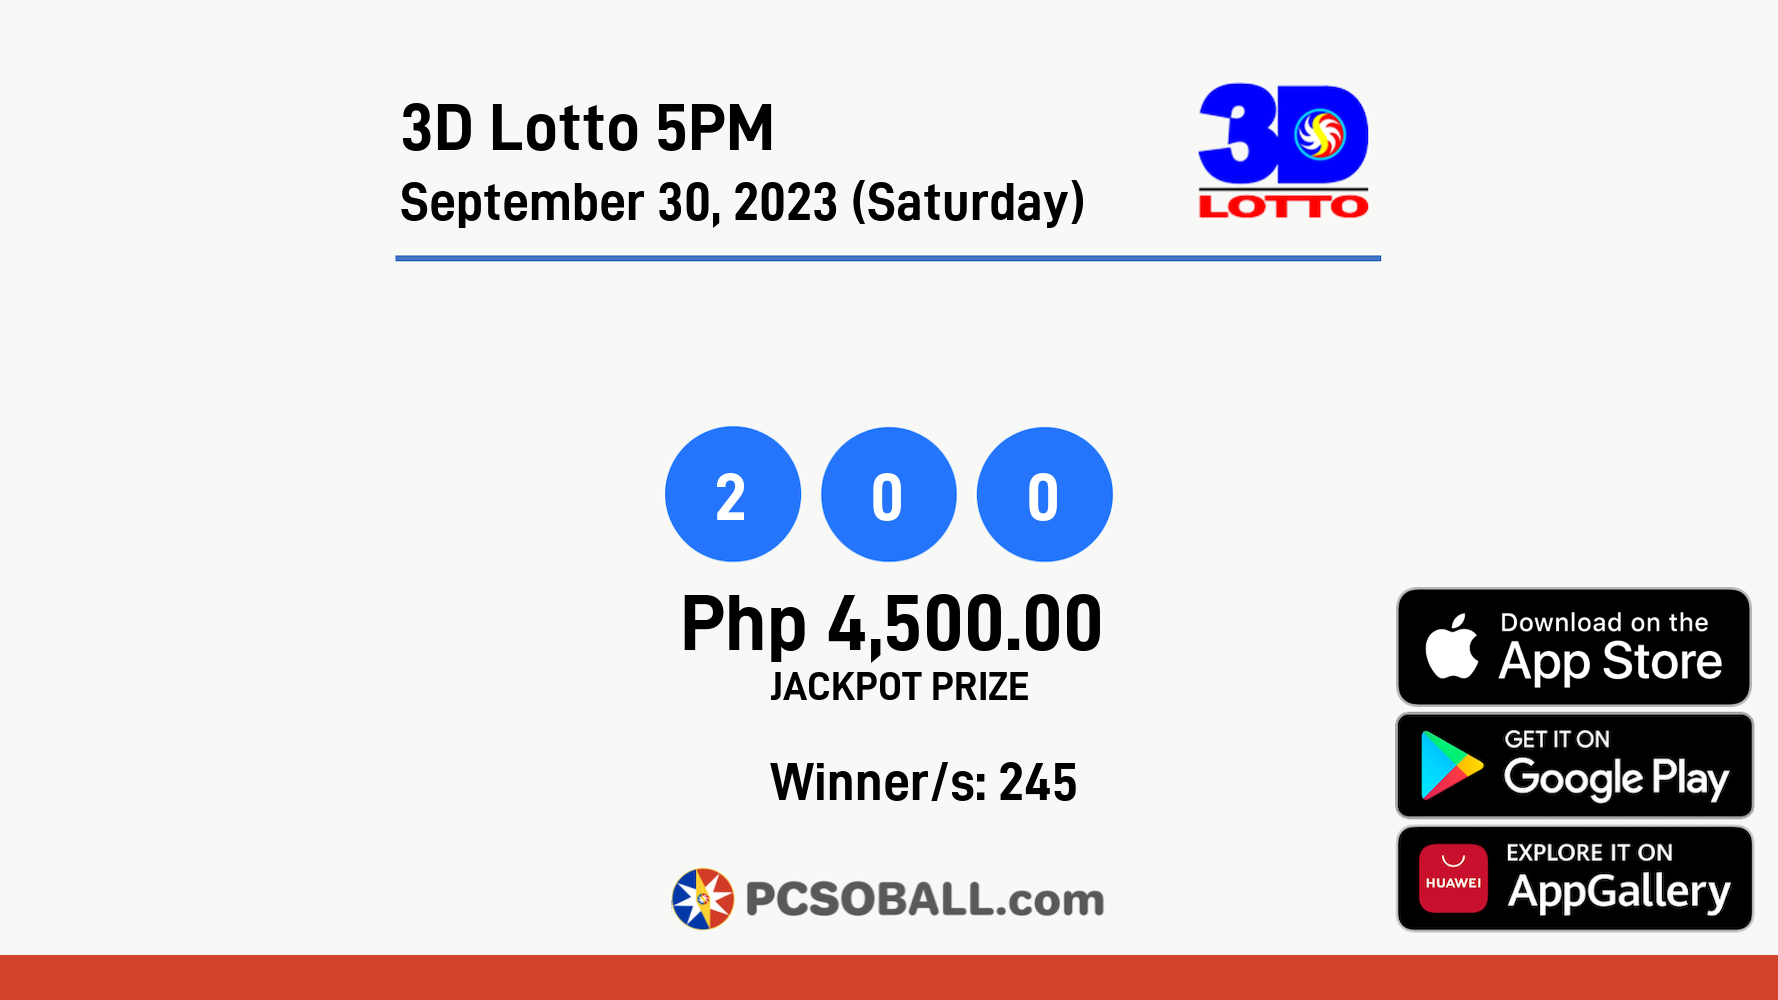 3D Lotto 5PM September 30, 2023 (Saturday) Result